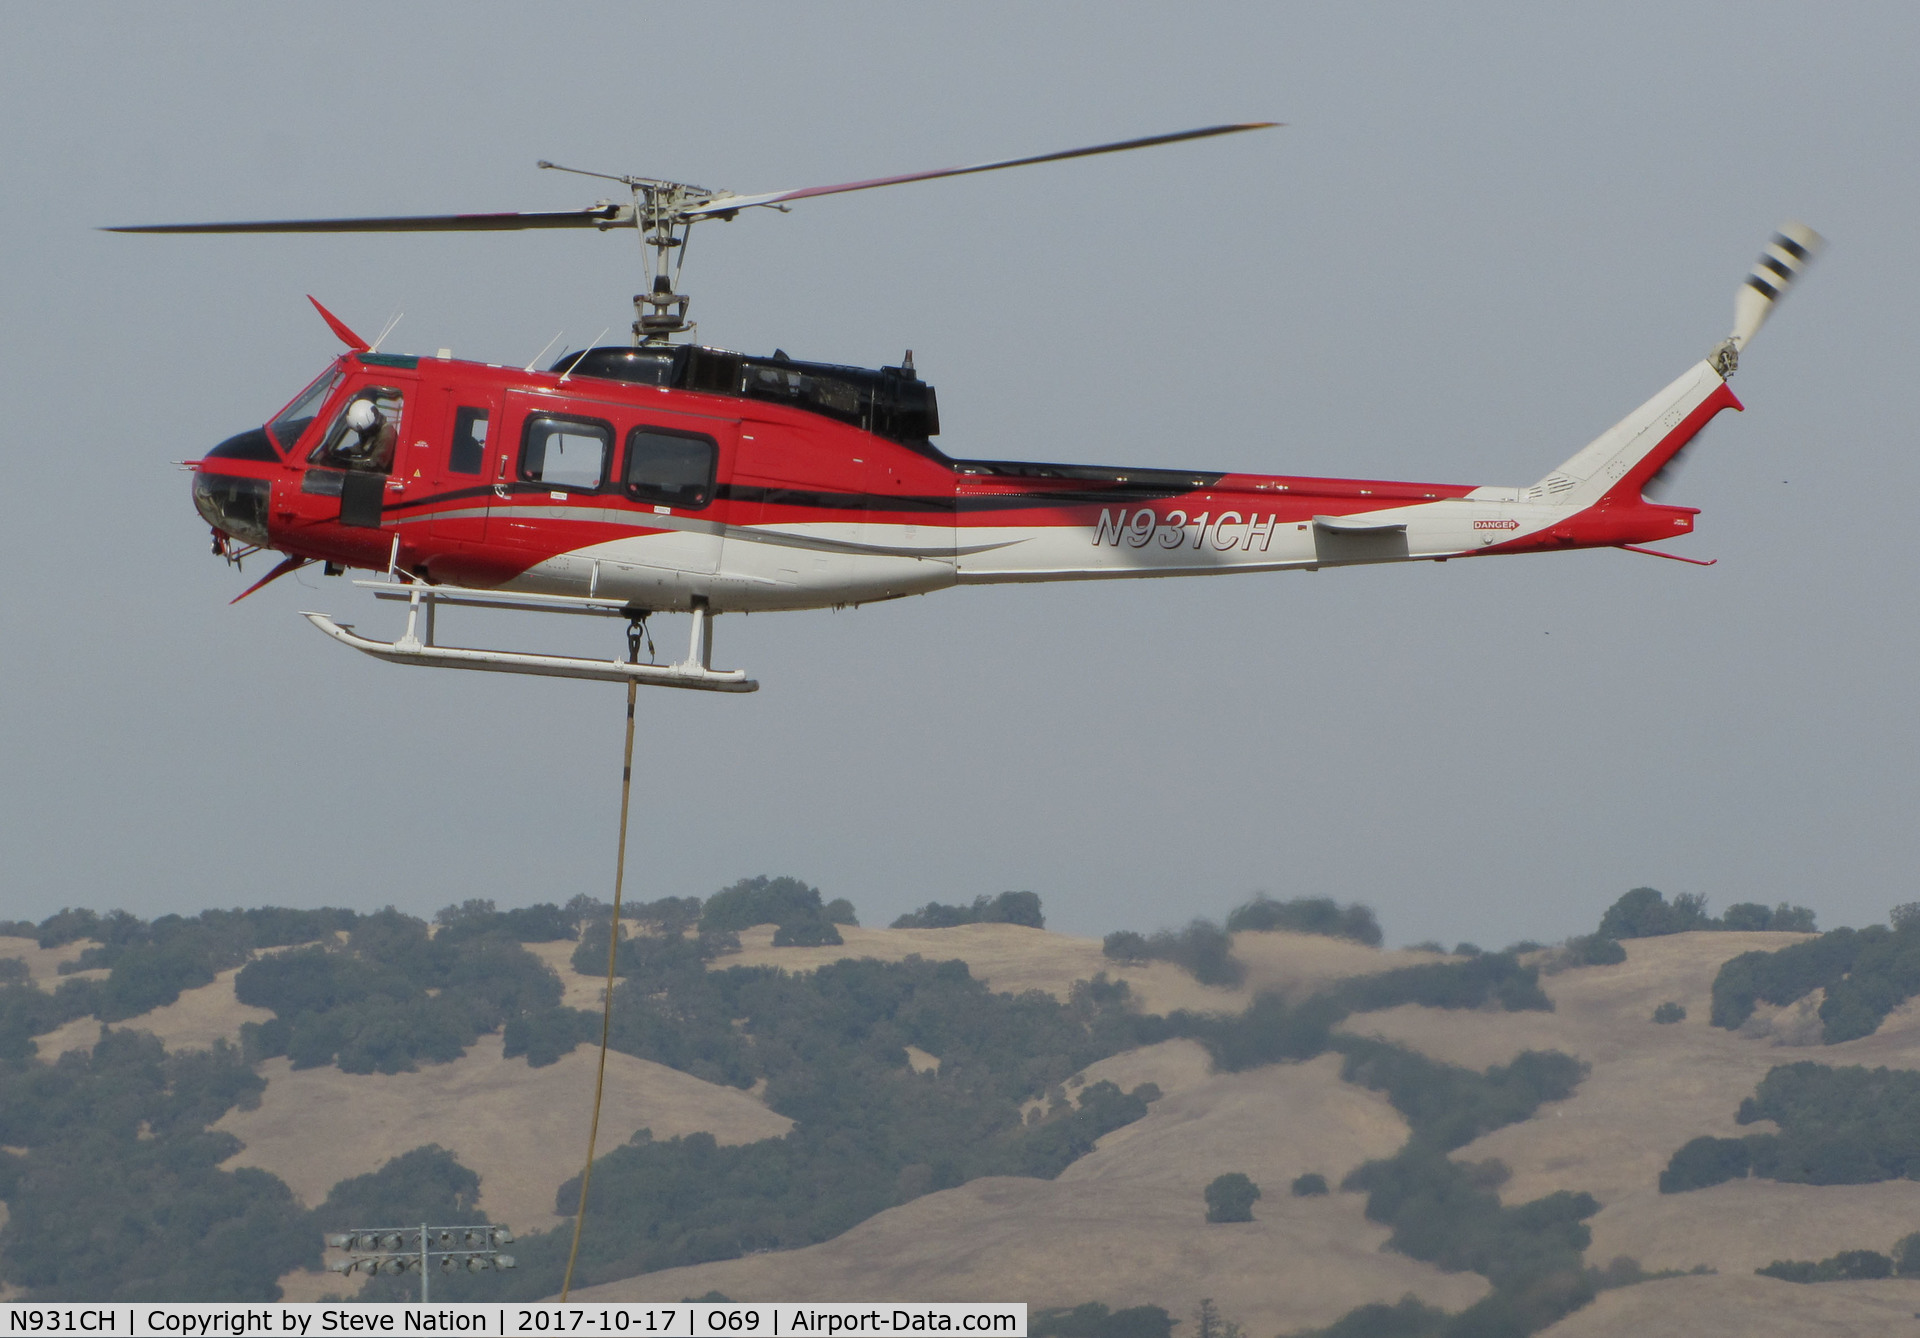 N931CH, 1972 Bell 205A-1 C/N 30110, Heligroup Fire LLC (Missoula, MT) 1972 Bell 205A-1 ready to land at Petaluma Municipal Airport, CA temporary home base from making water drops on the devastating October 2017 Northern California wildfires